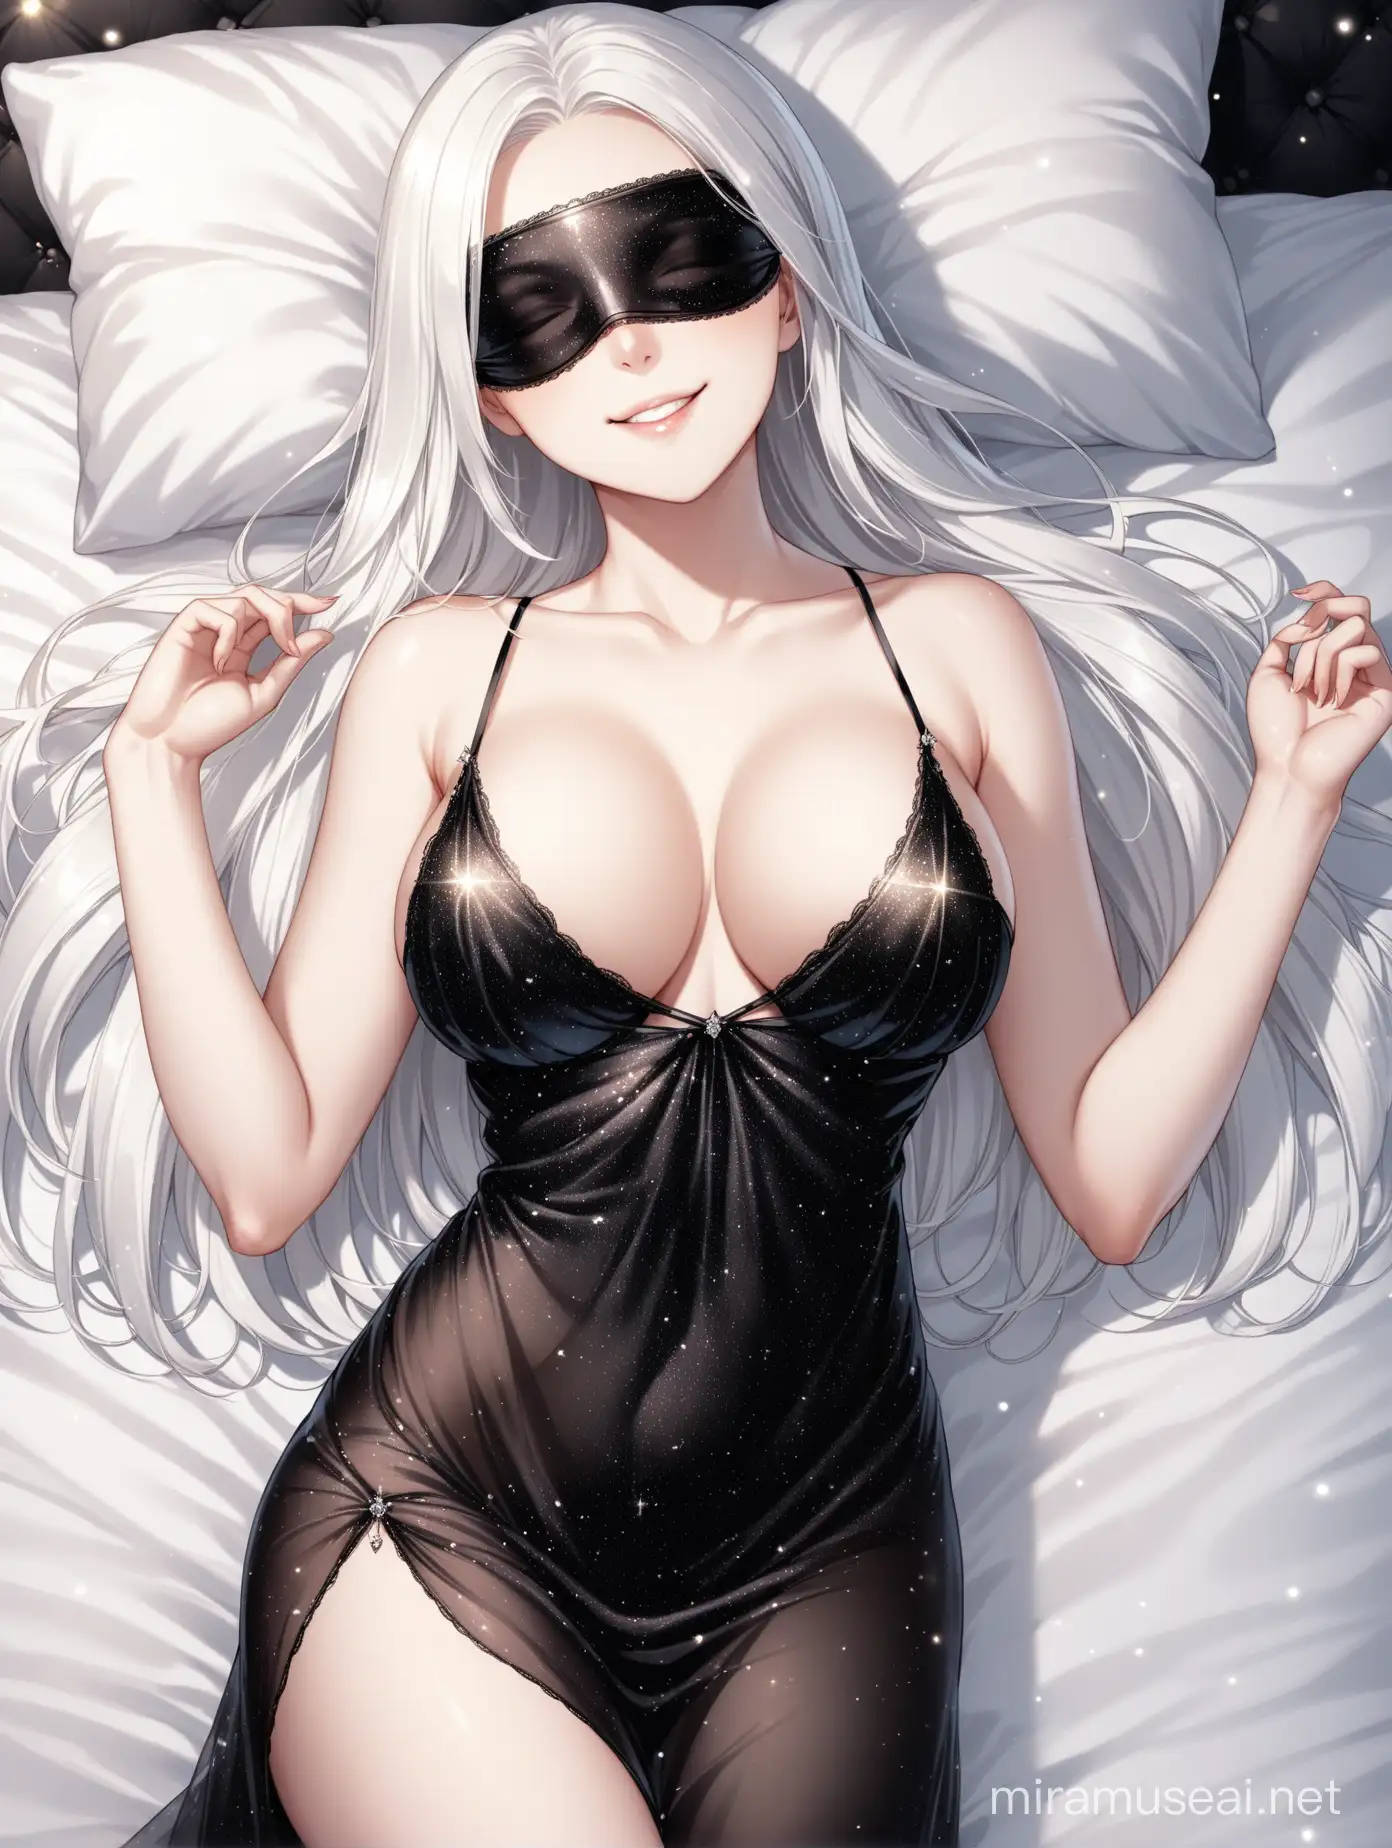 A beautiful woman, with pale skin, white long  hair, and big breasts, wearing a see-trough black sparkling slip dress that exposes her chest, and a black blindfold, lying in bed, smiling at the viewer 